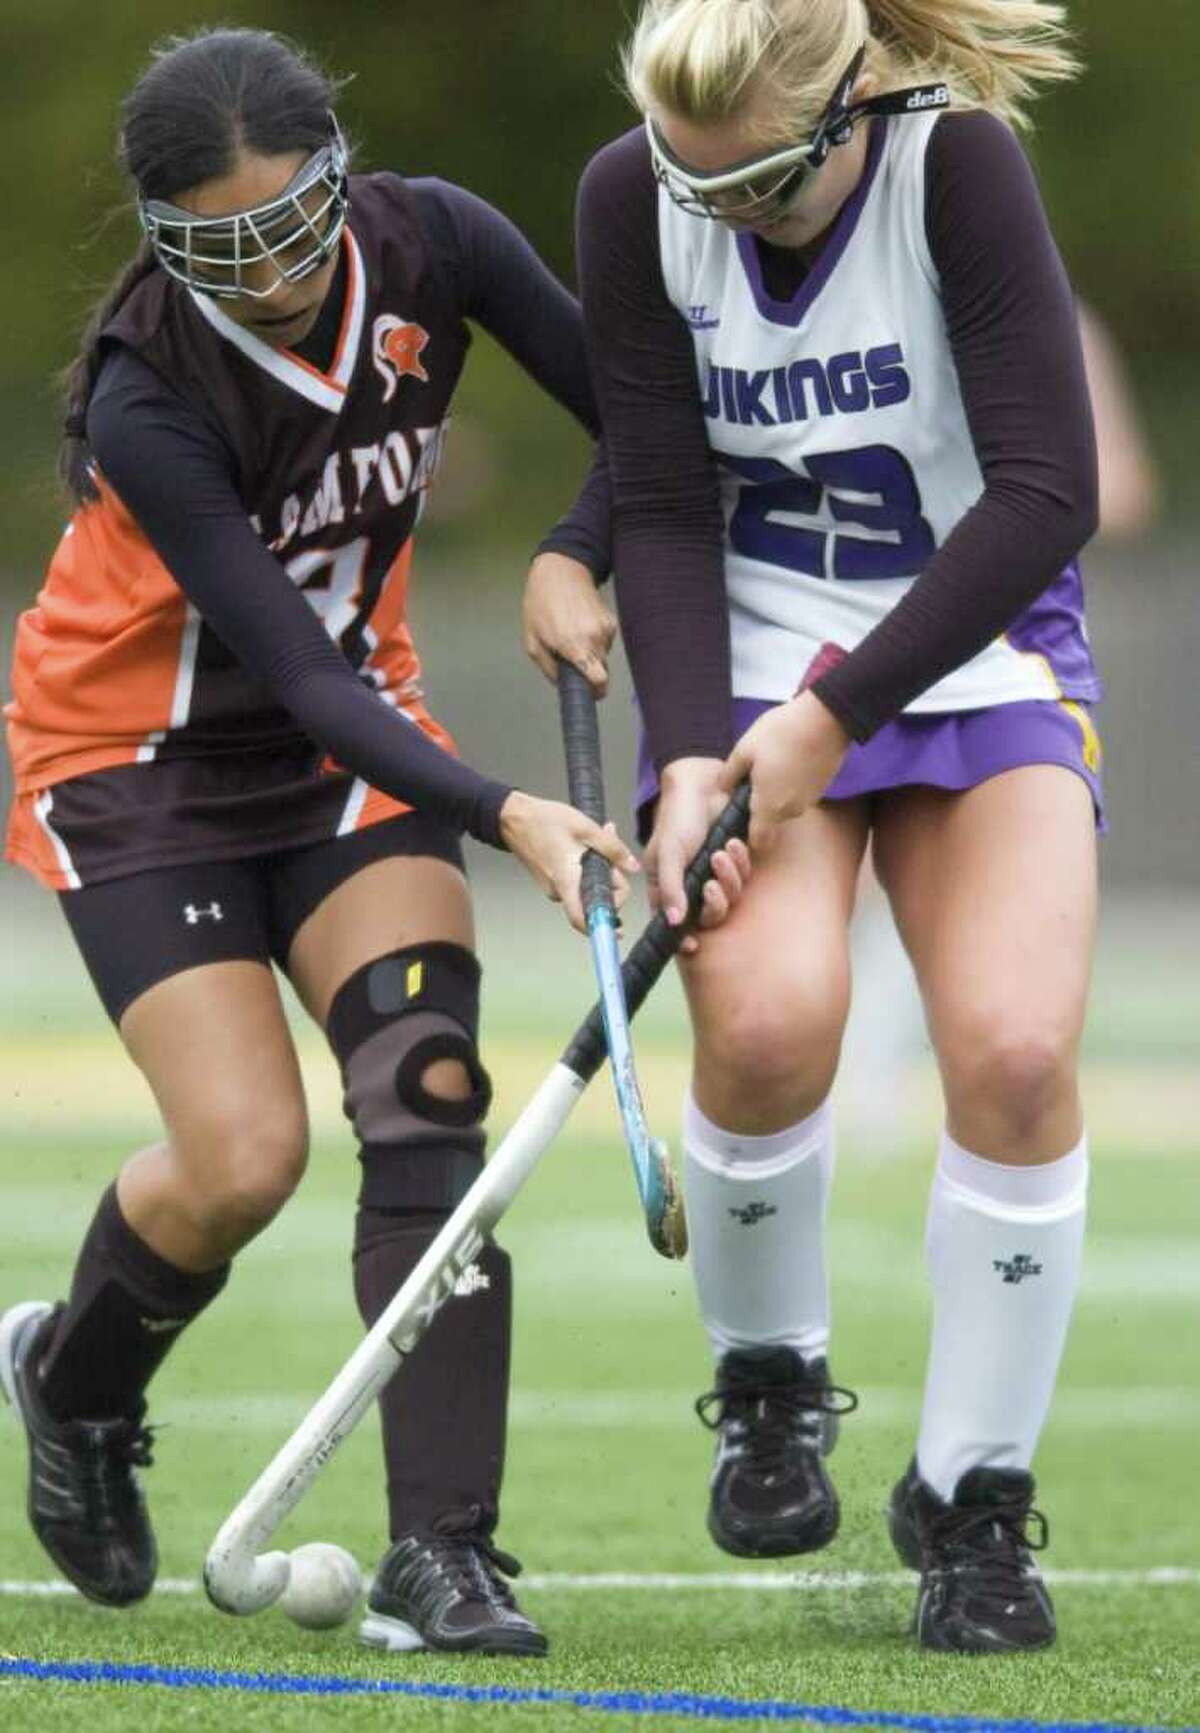 Stamford's Kelsey Cognetta, left, and Westhill's Allison Macari, right, are two of the top players in the FCIAC.